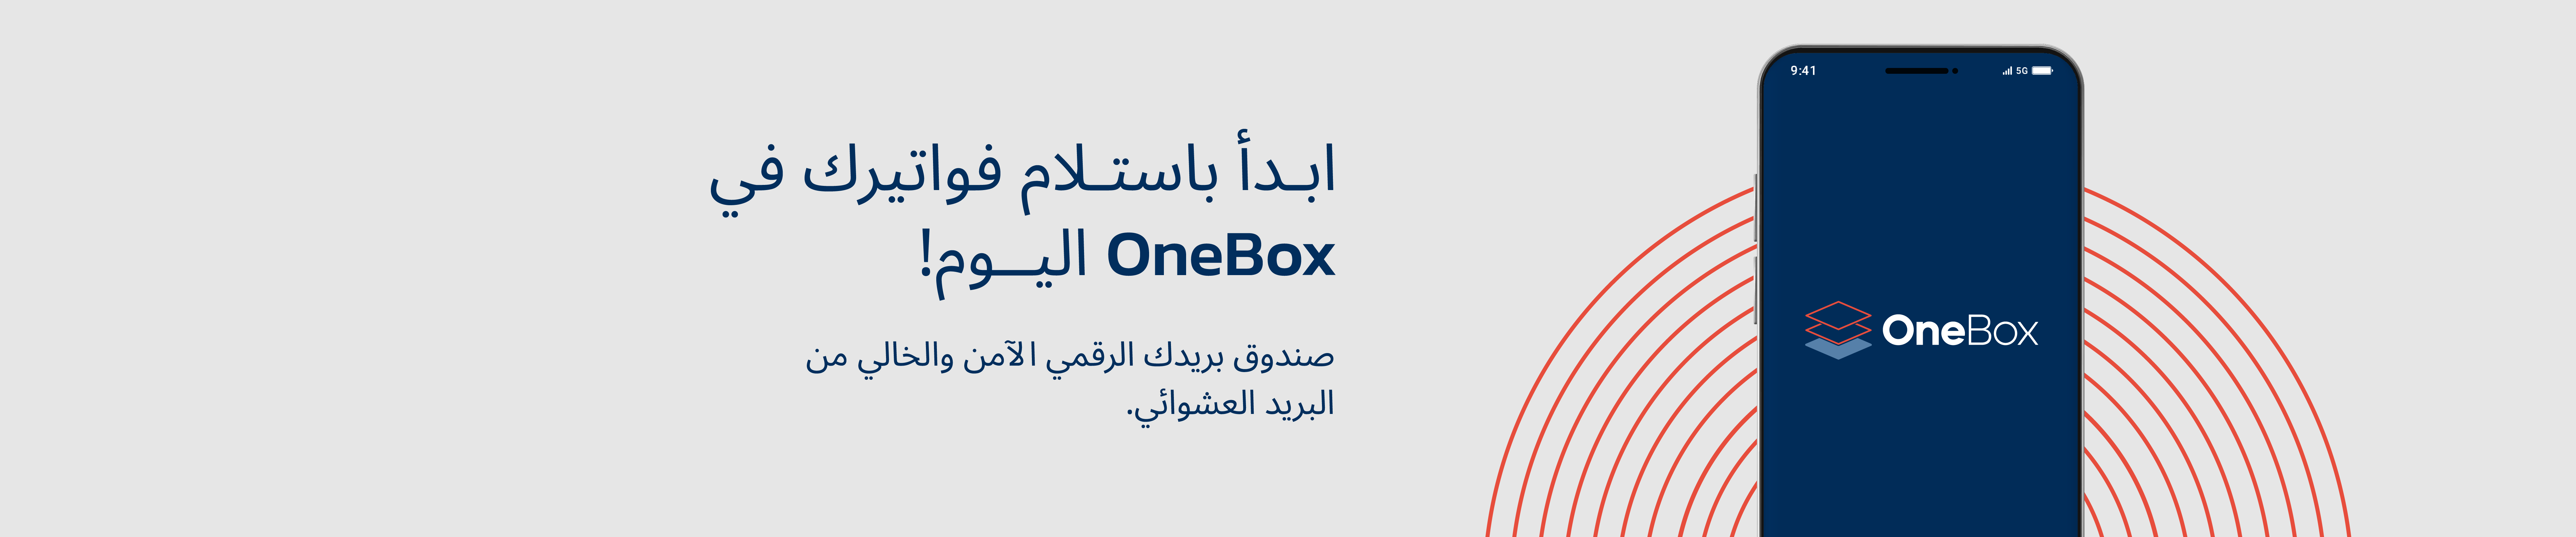 2022.09.11_OneBox Batelco Rollout_Website Home Banner 1920x400 Ar